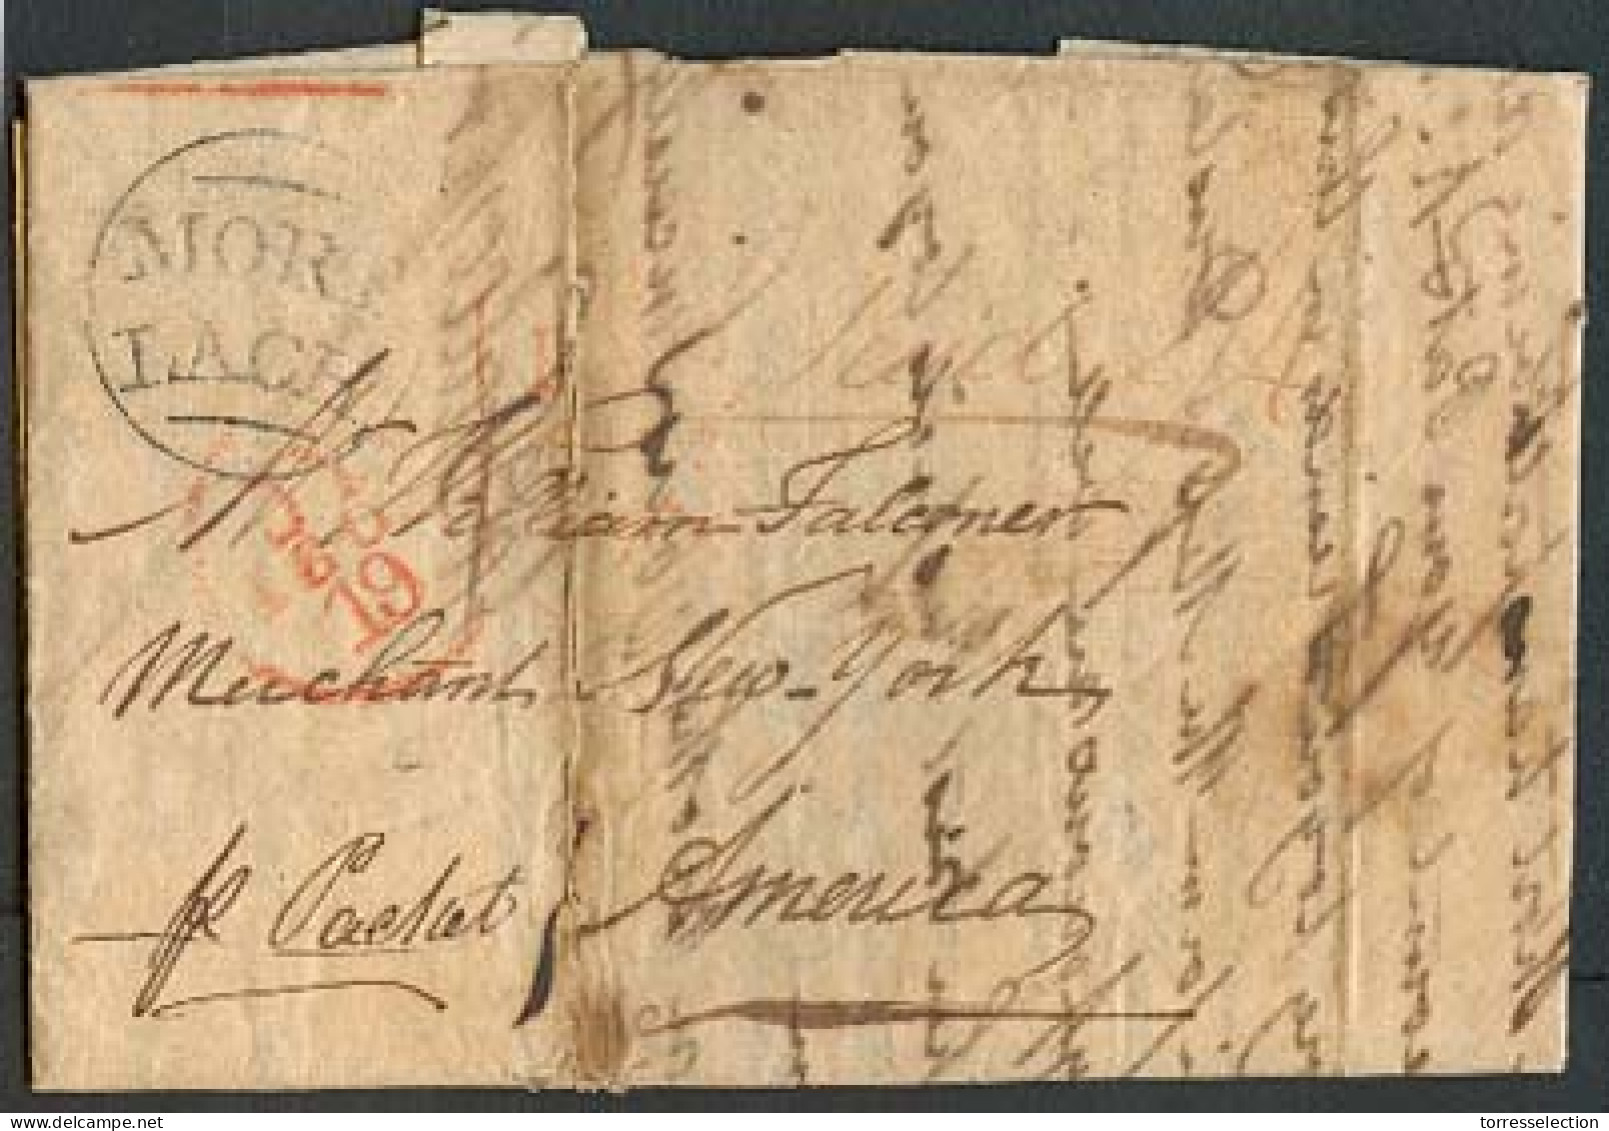 GREAT BRITAIN. 1805 (14 July). Kinerm NY / Scotland / Mortlach - USA / NY. Circular Type With Curved Letters (Appeared 1 - ...-1840 Prephilately